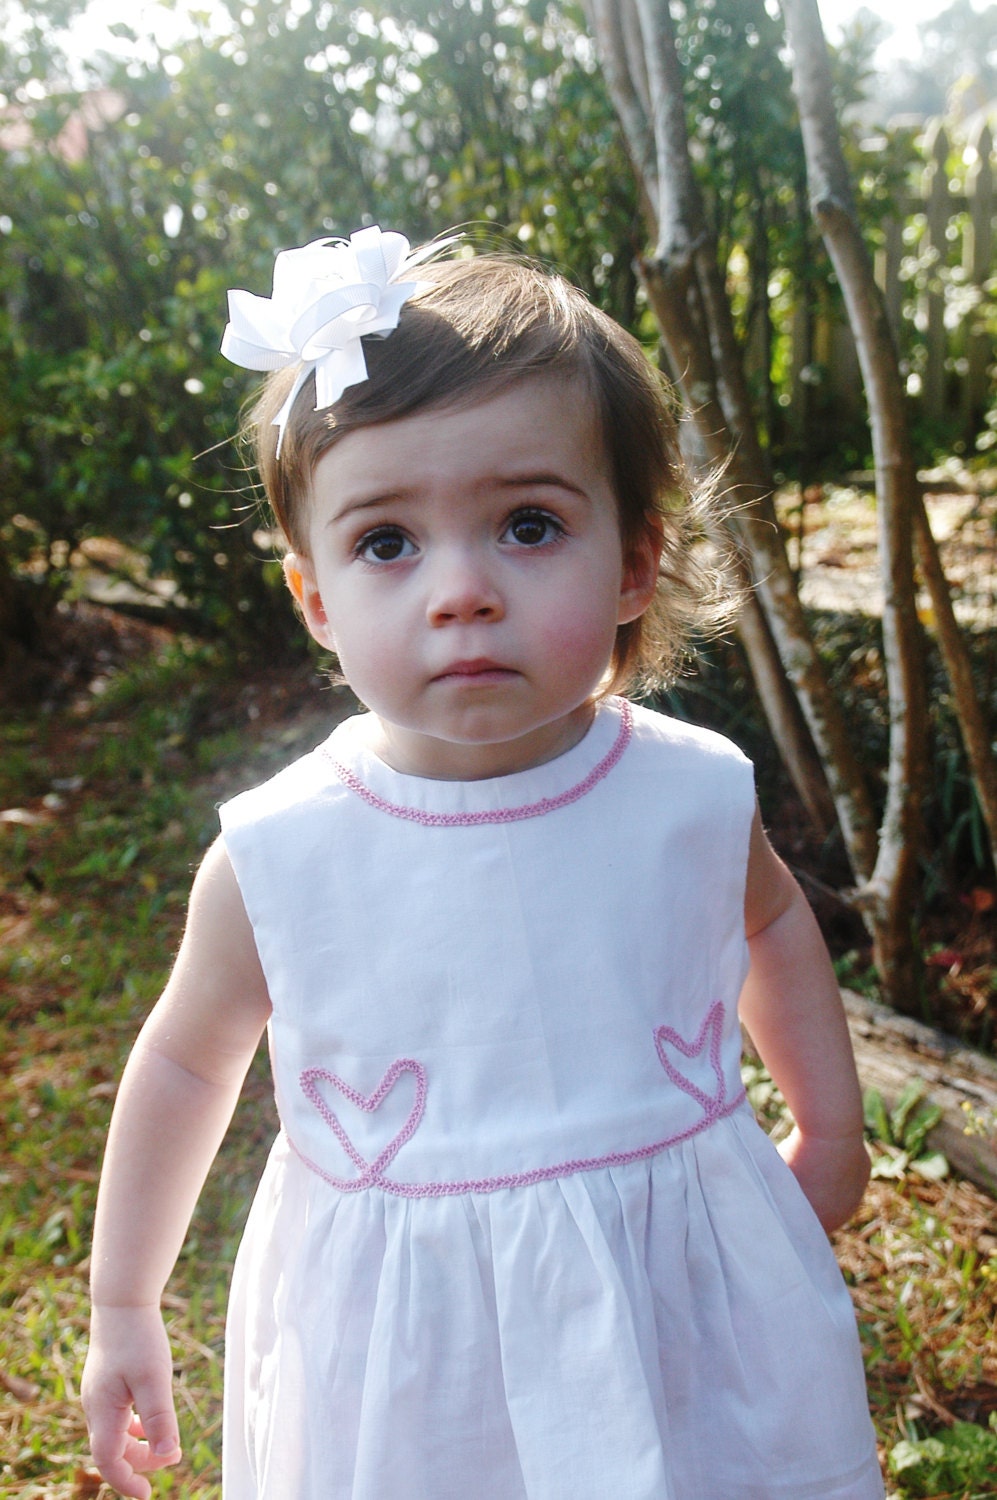 White Waterfall Dress with Pink Hearts by Papoose Clothing - papooseclothing